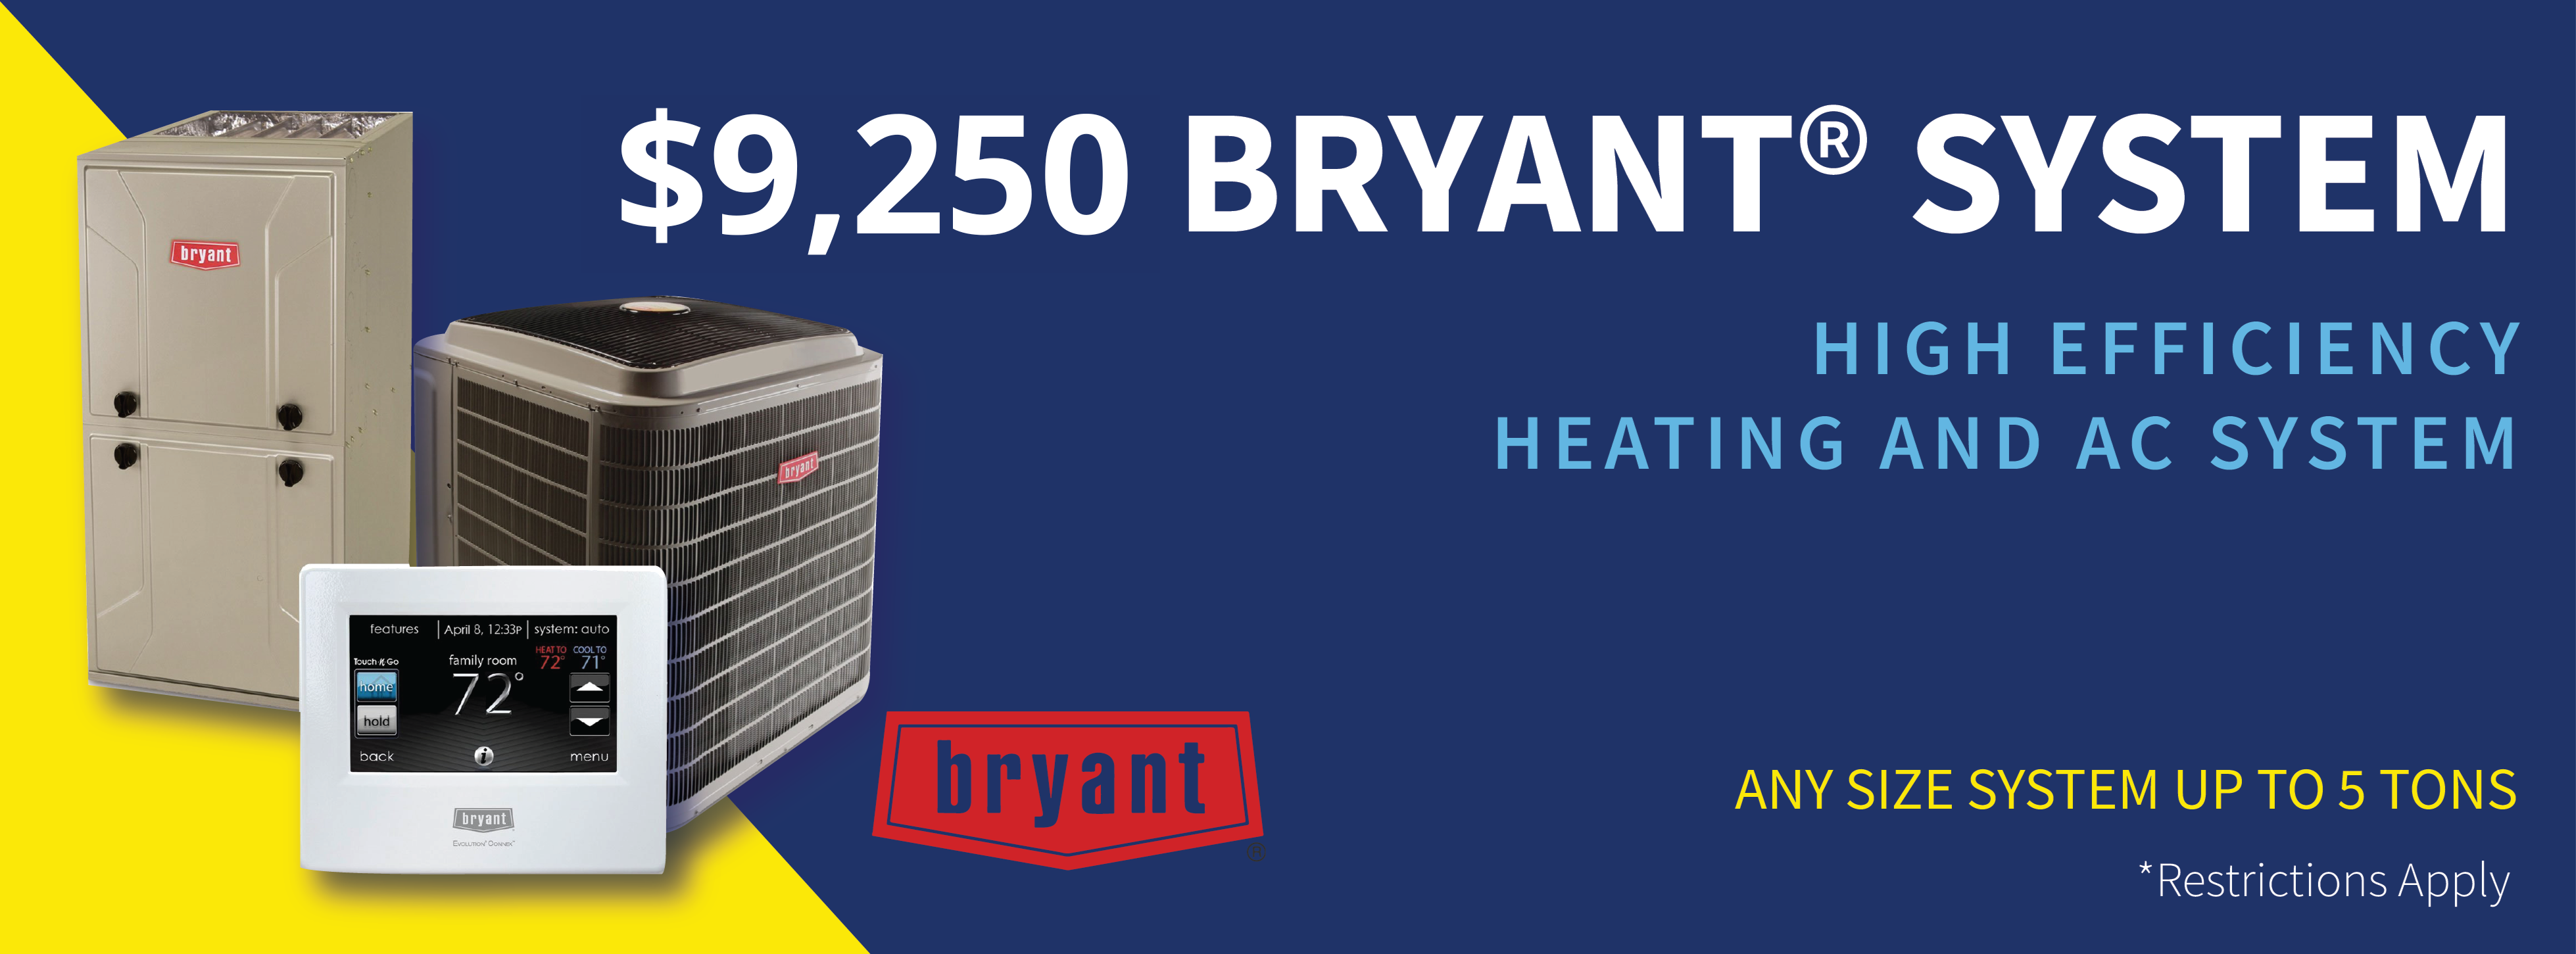 Bryant Heating & AC System Specials